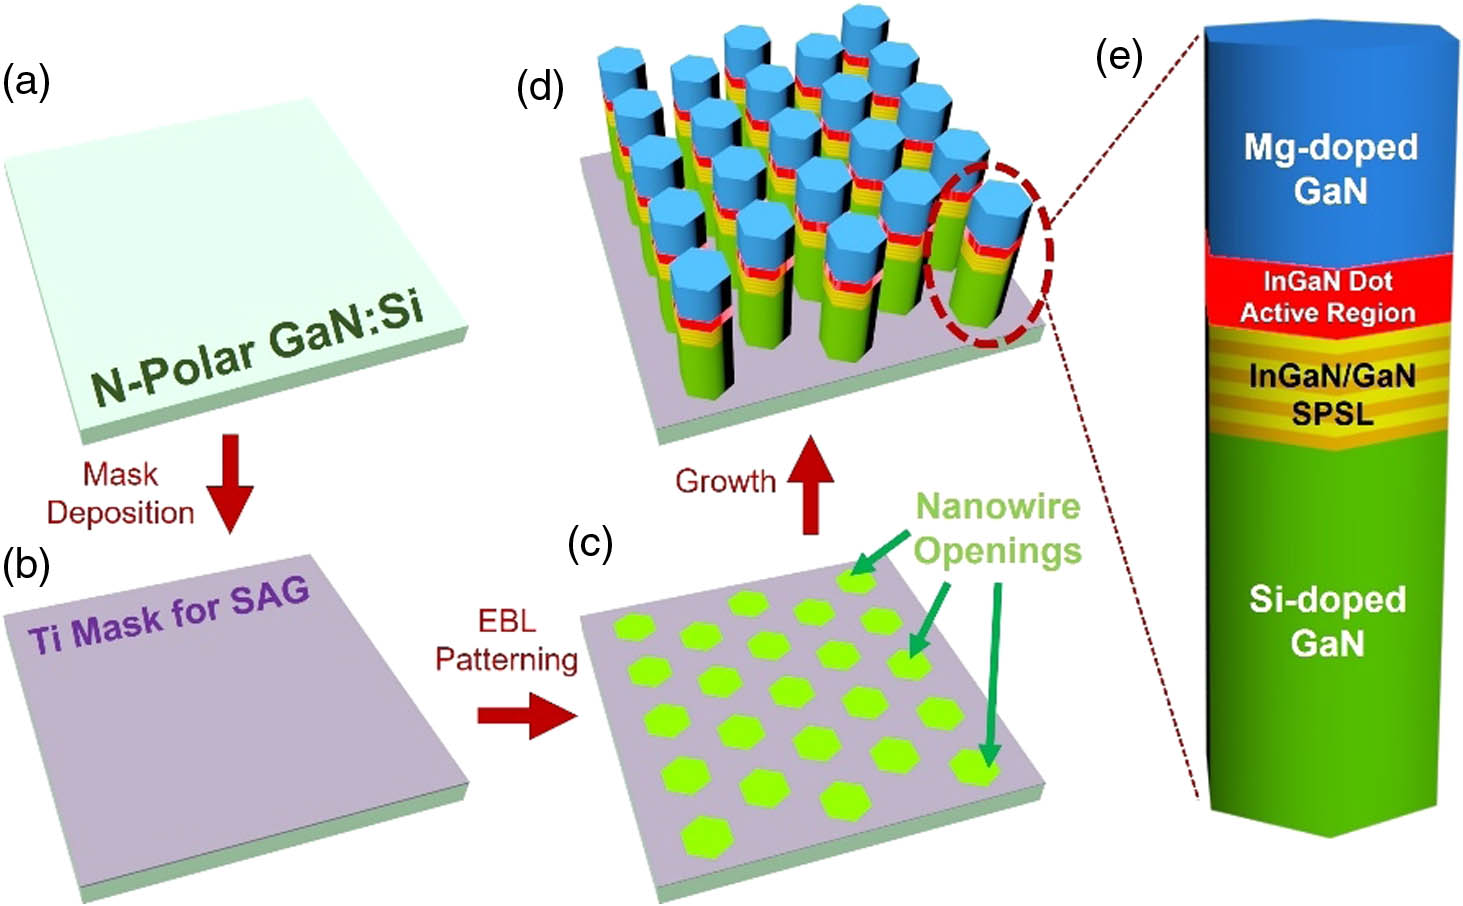 (a)–(d) Schematic of selective-area epitaxy of N-polar InGaN/GaN nanowire LED heterostructures. (e) Schematic of a single nanowire LED heterostructure, showing the different layers.